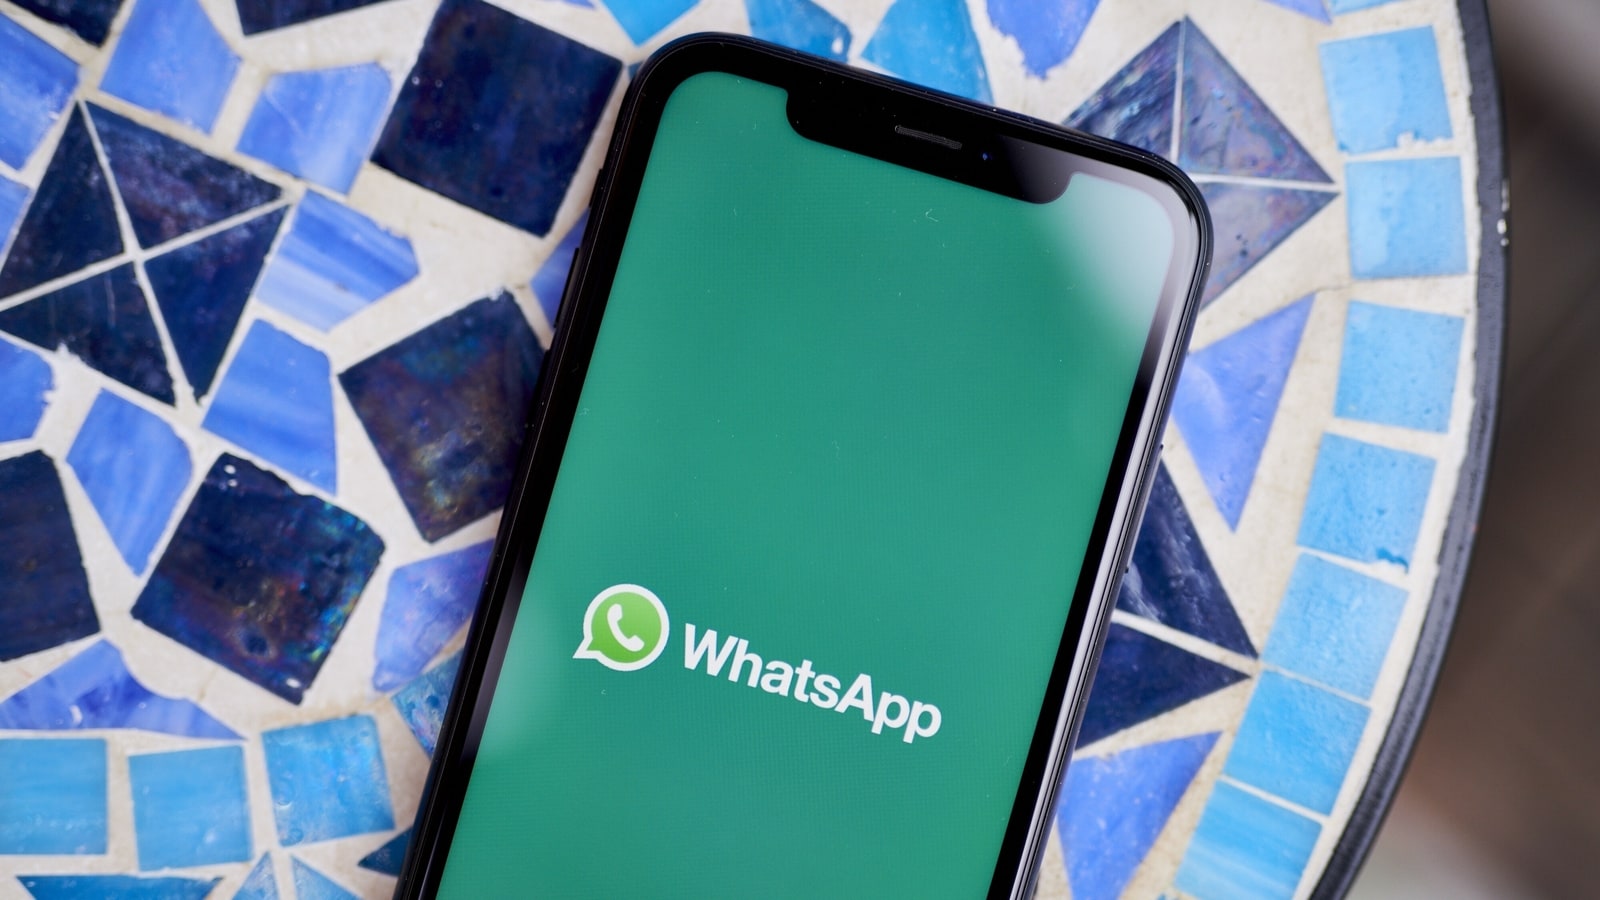 WhatsApp looks to break barriers, will enable cross app messaging with Signal and Telegram